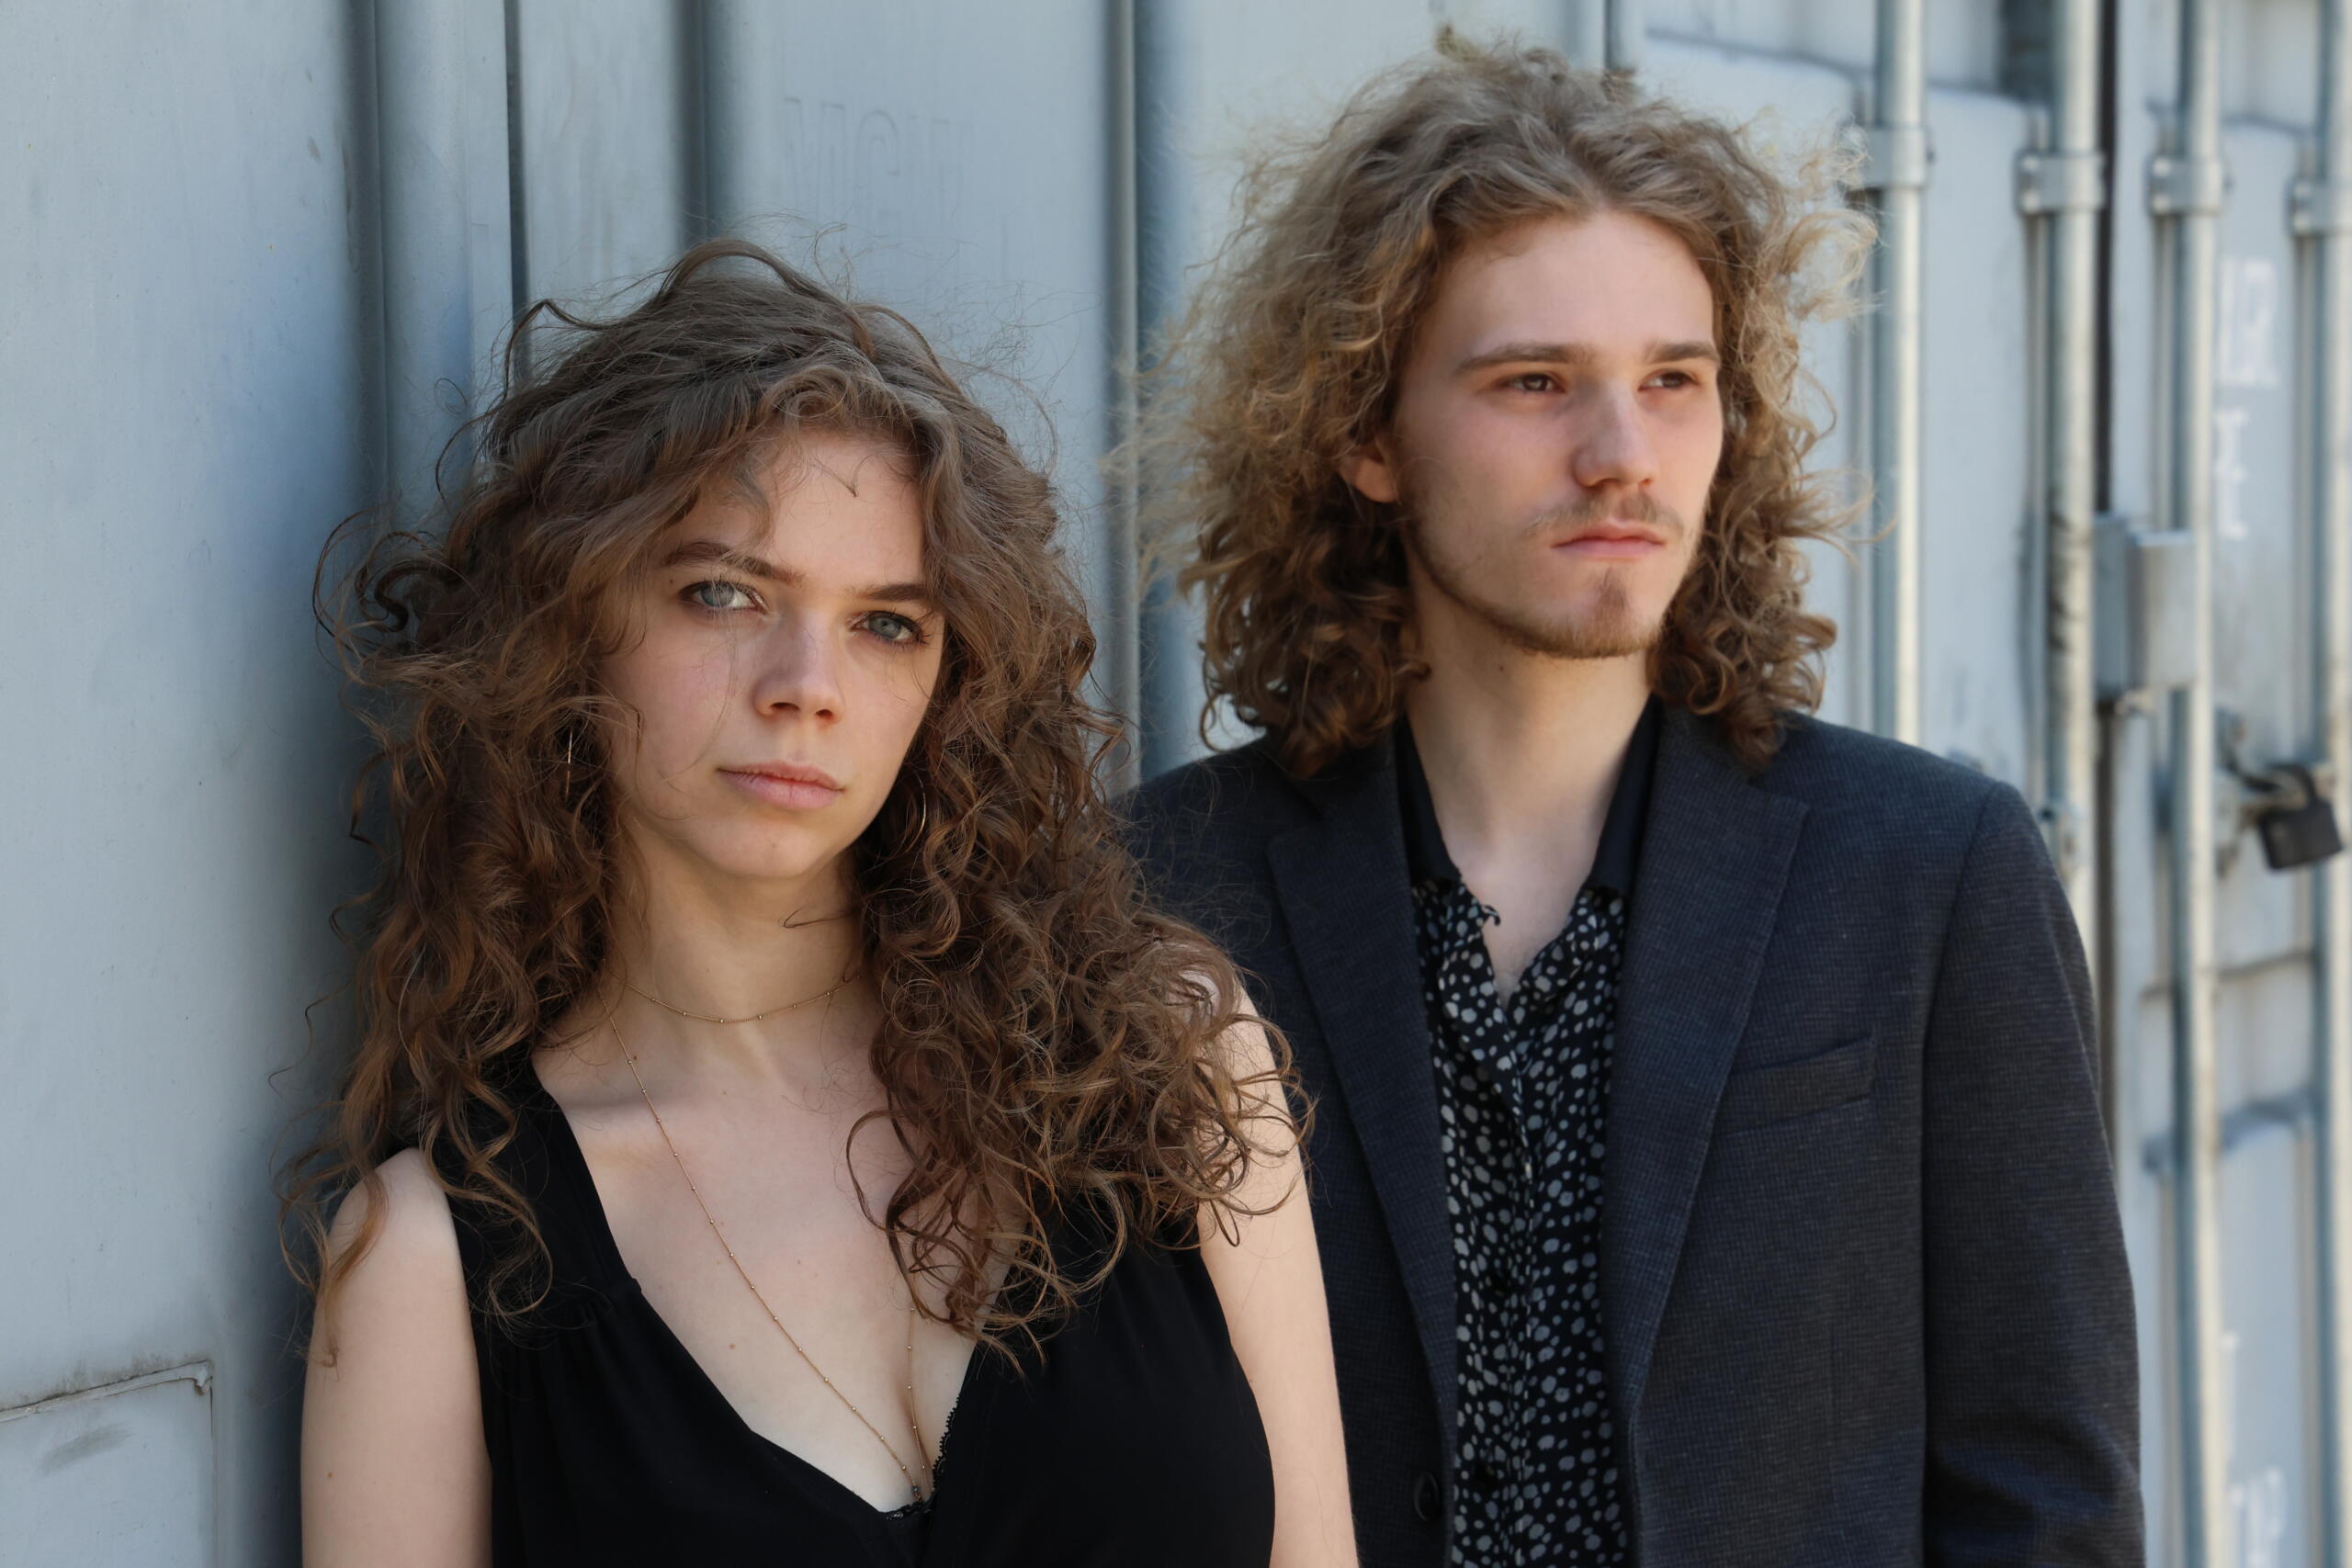 A young woman with wild curls and a young man stand in front of a metal container.